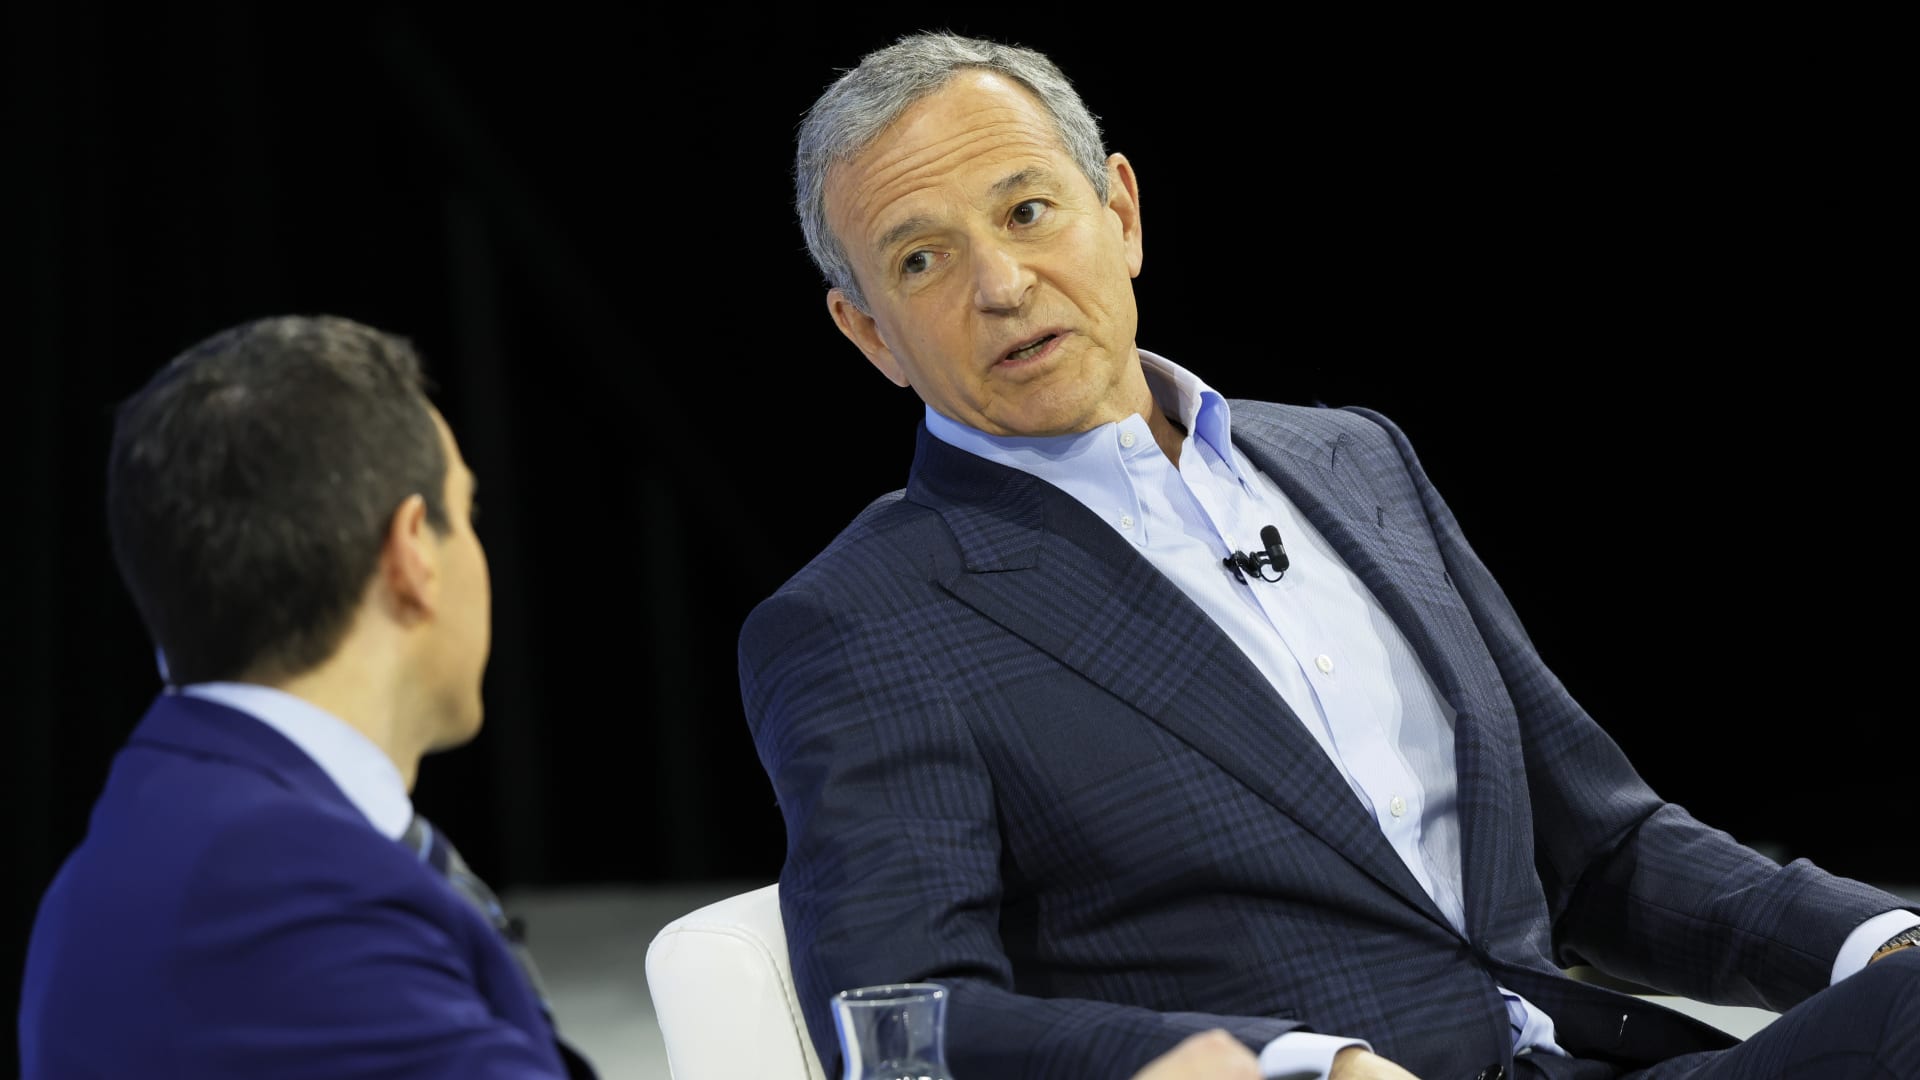 Disney CEO Bob Iger admits company's movies have been too focused on messaging